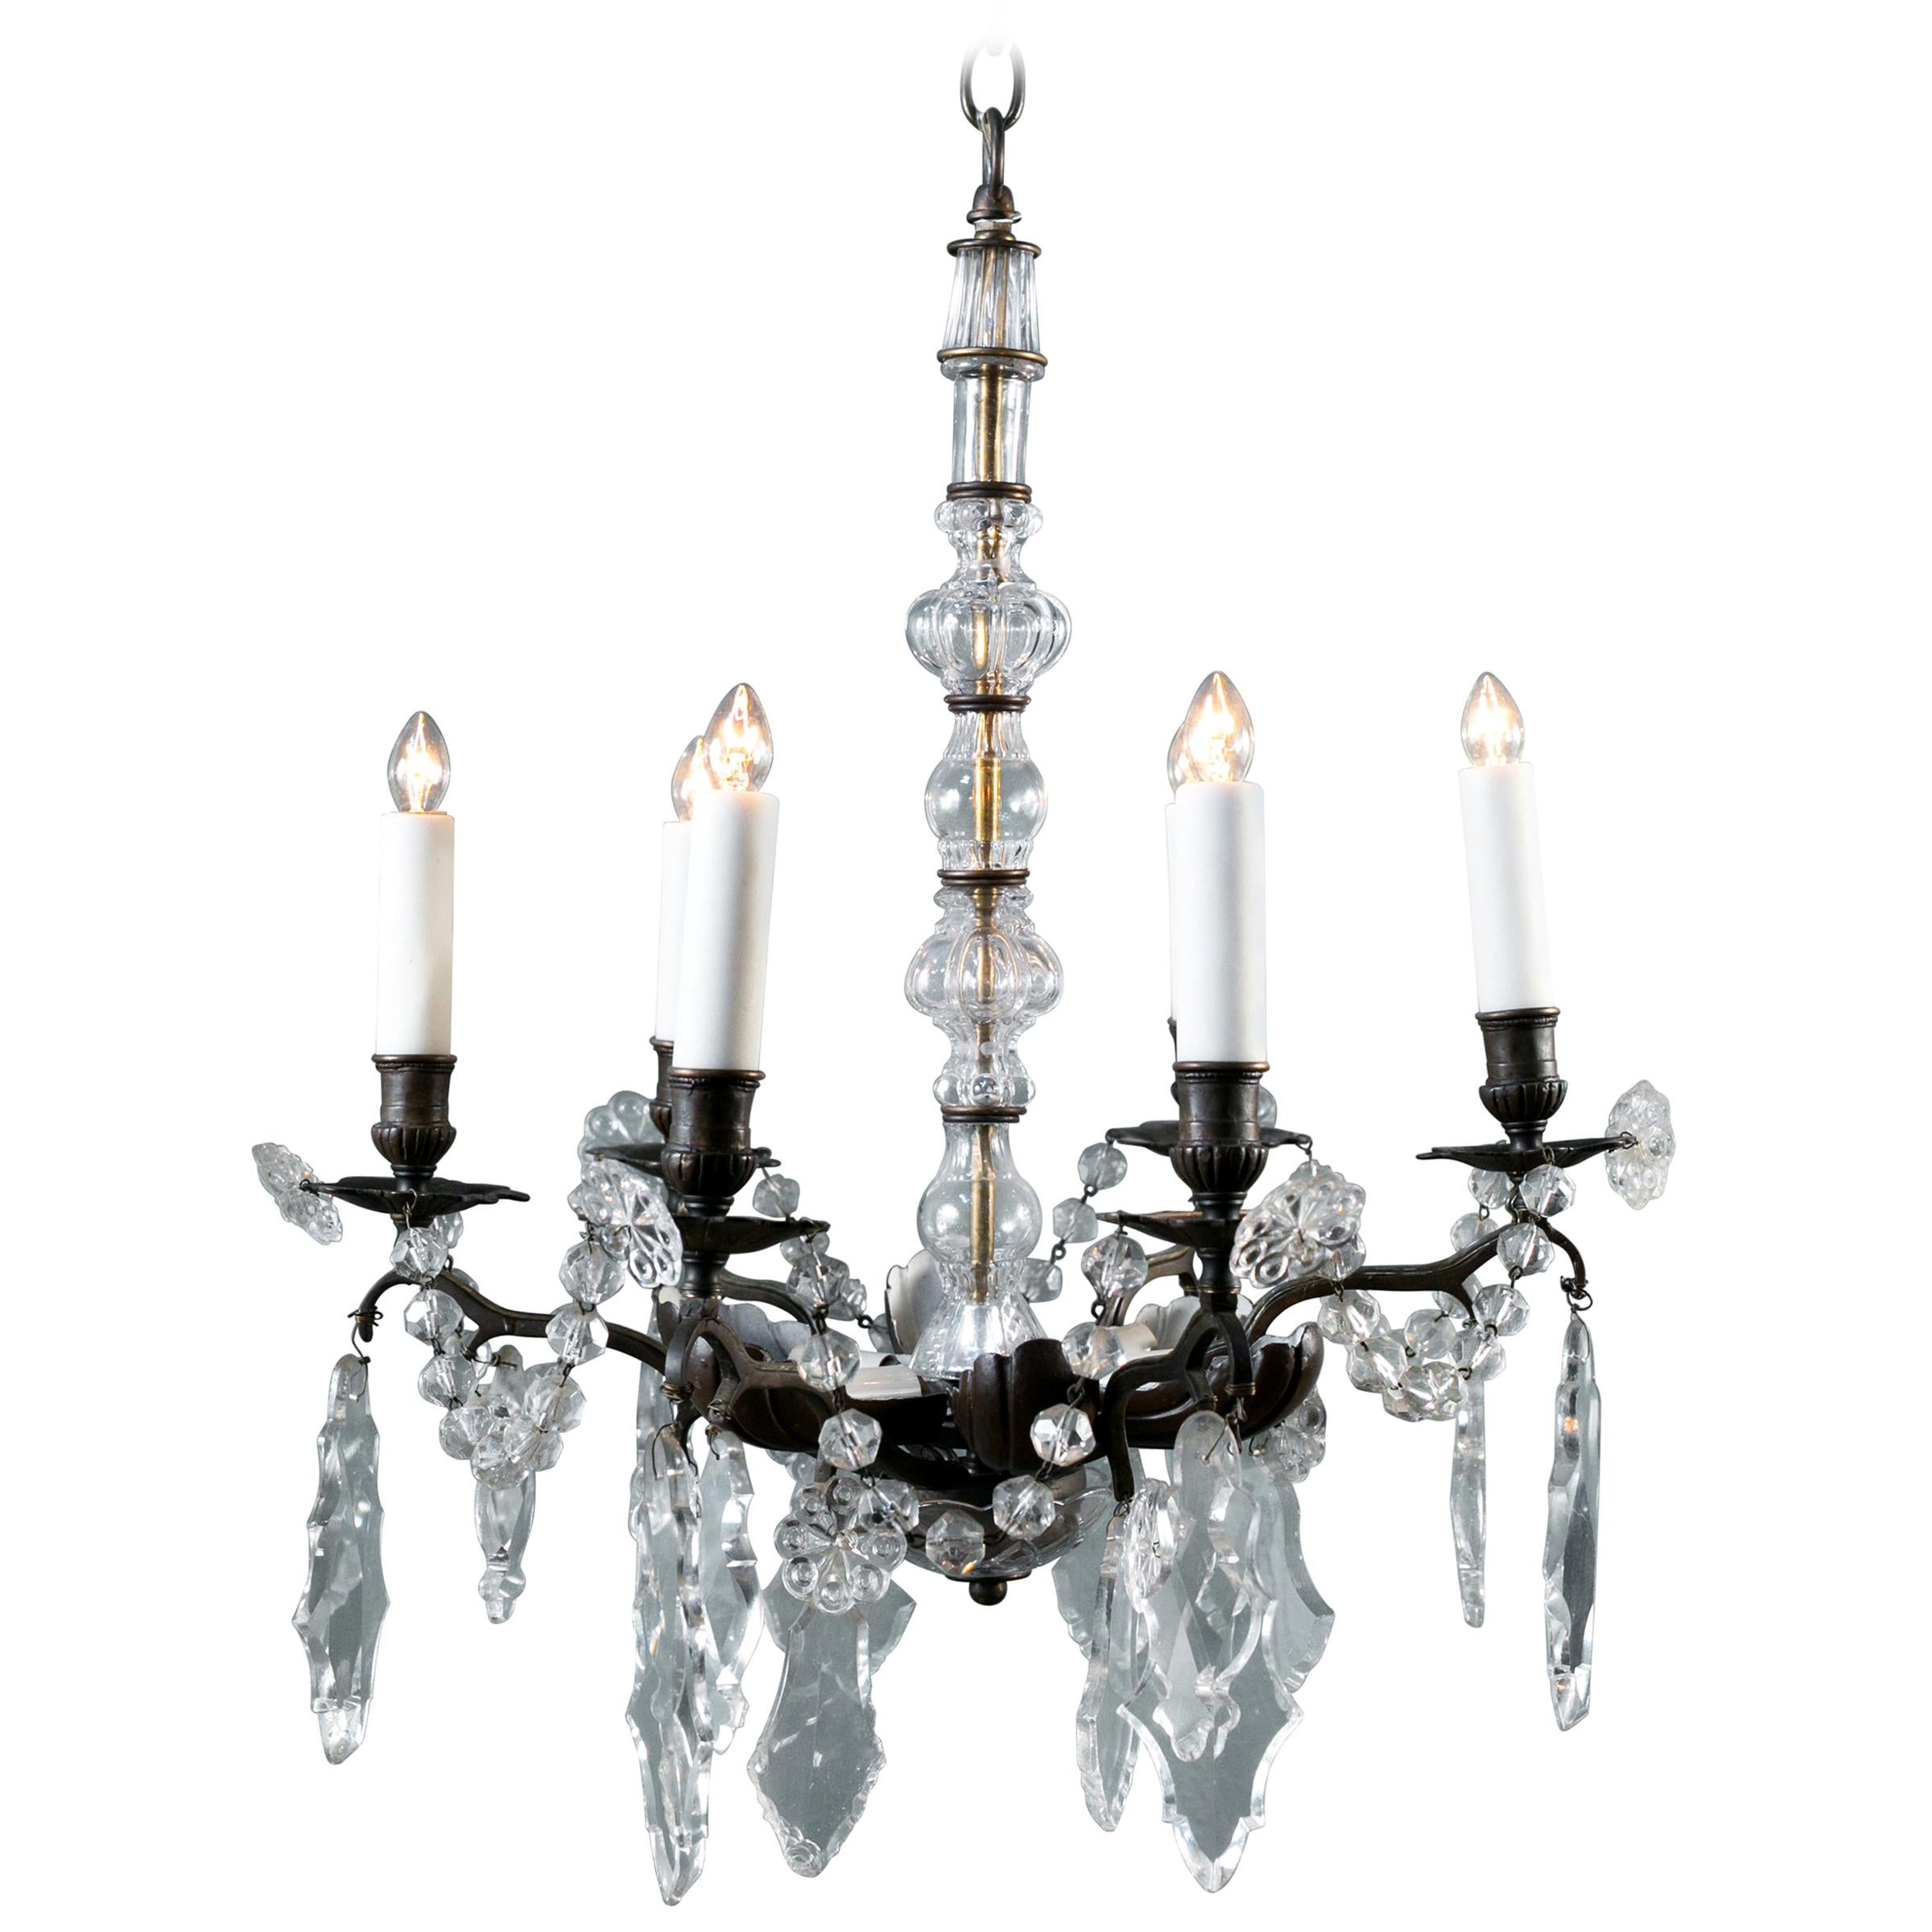 Bronze and Crystal Chandelier from France, circa 1890